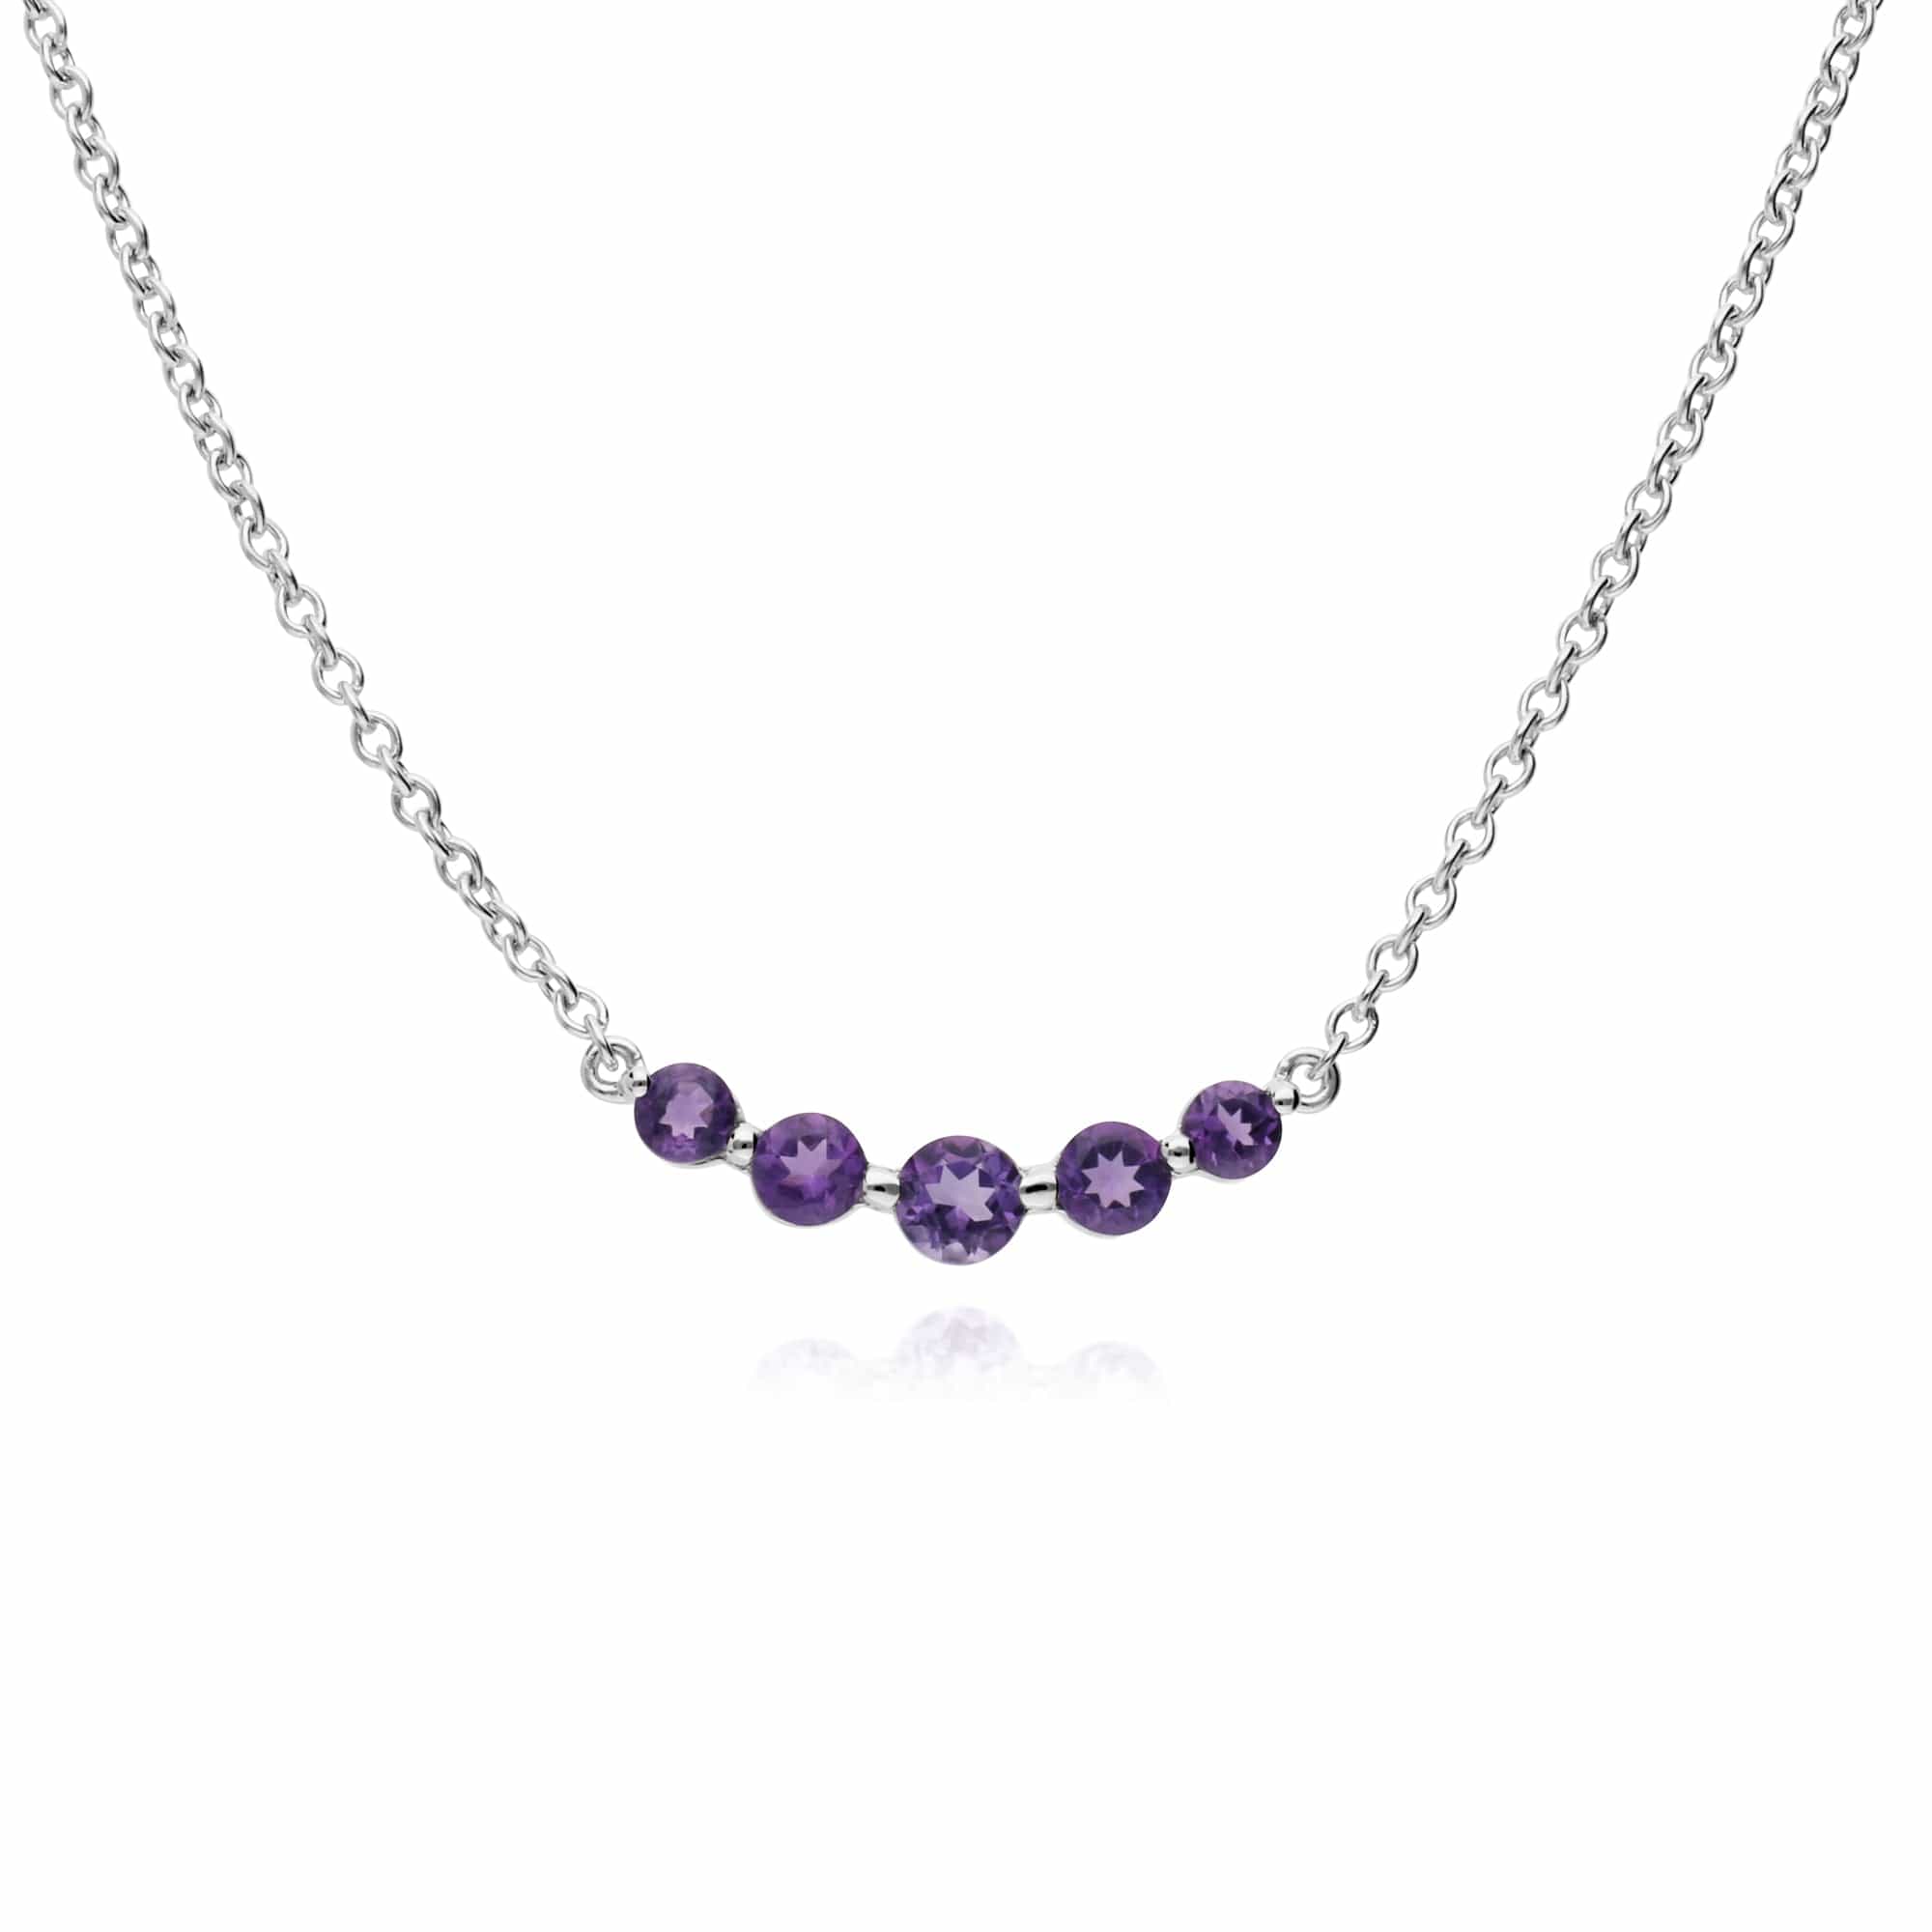 270N034103925-270R055903925 Classic Round Amethyst Five Stone Gradient Ring & Necklace Set in 925 Sterling Silver 2